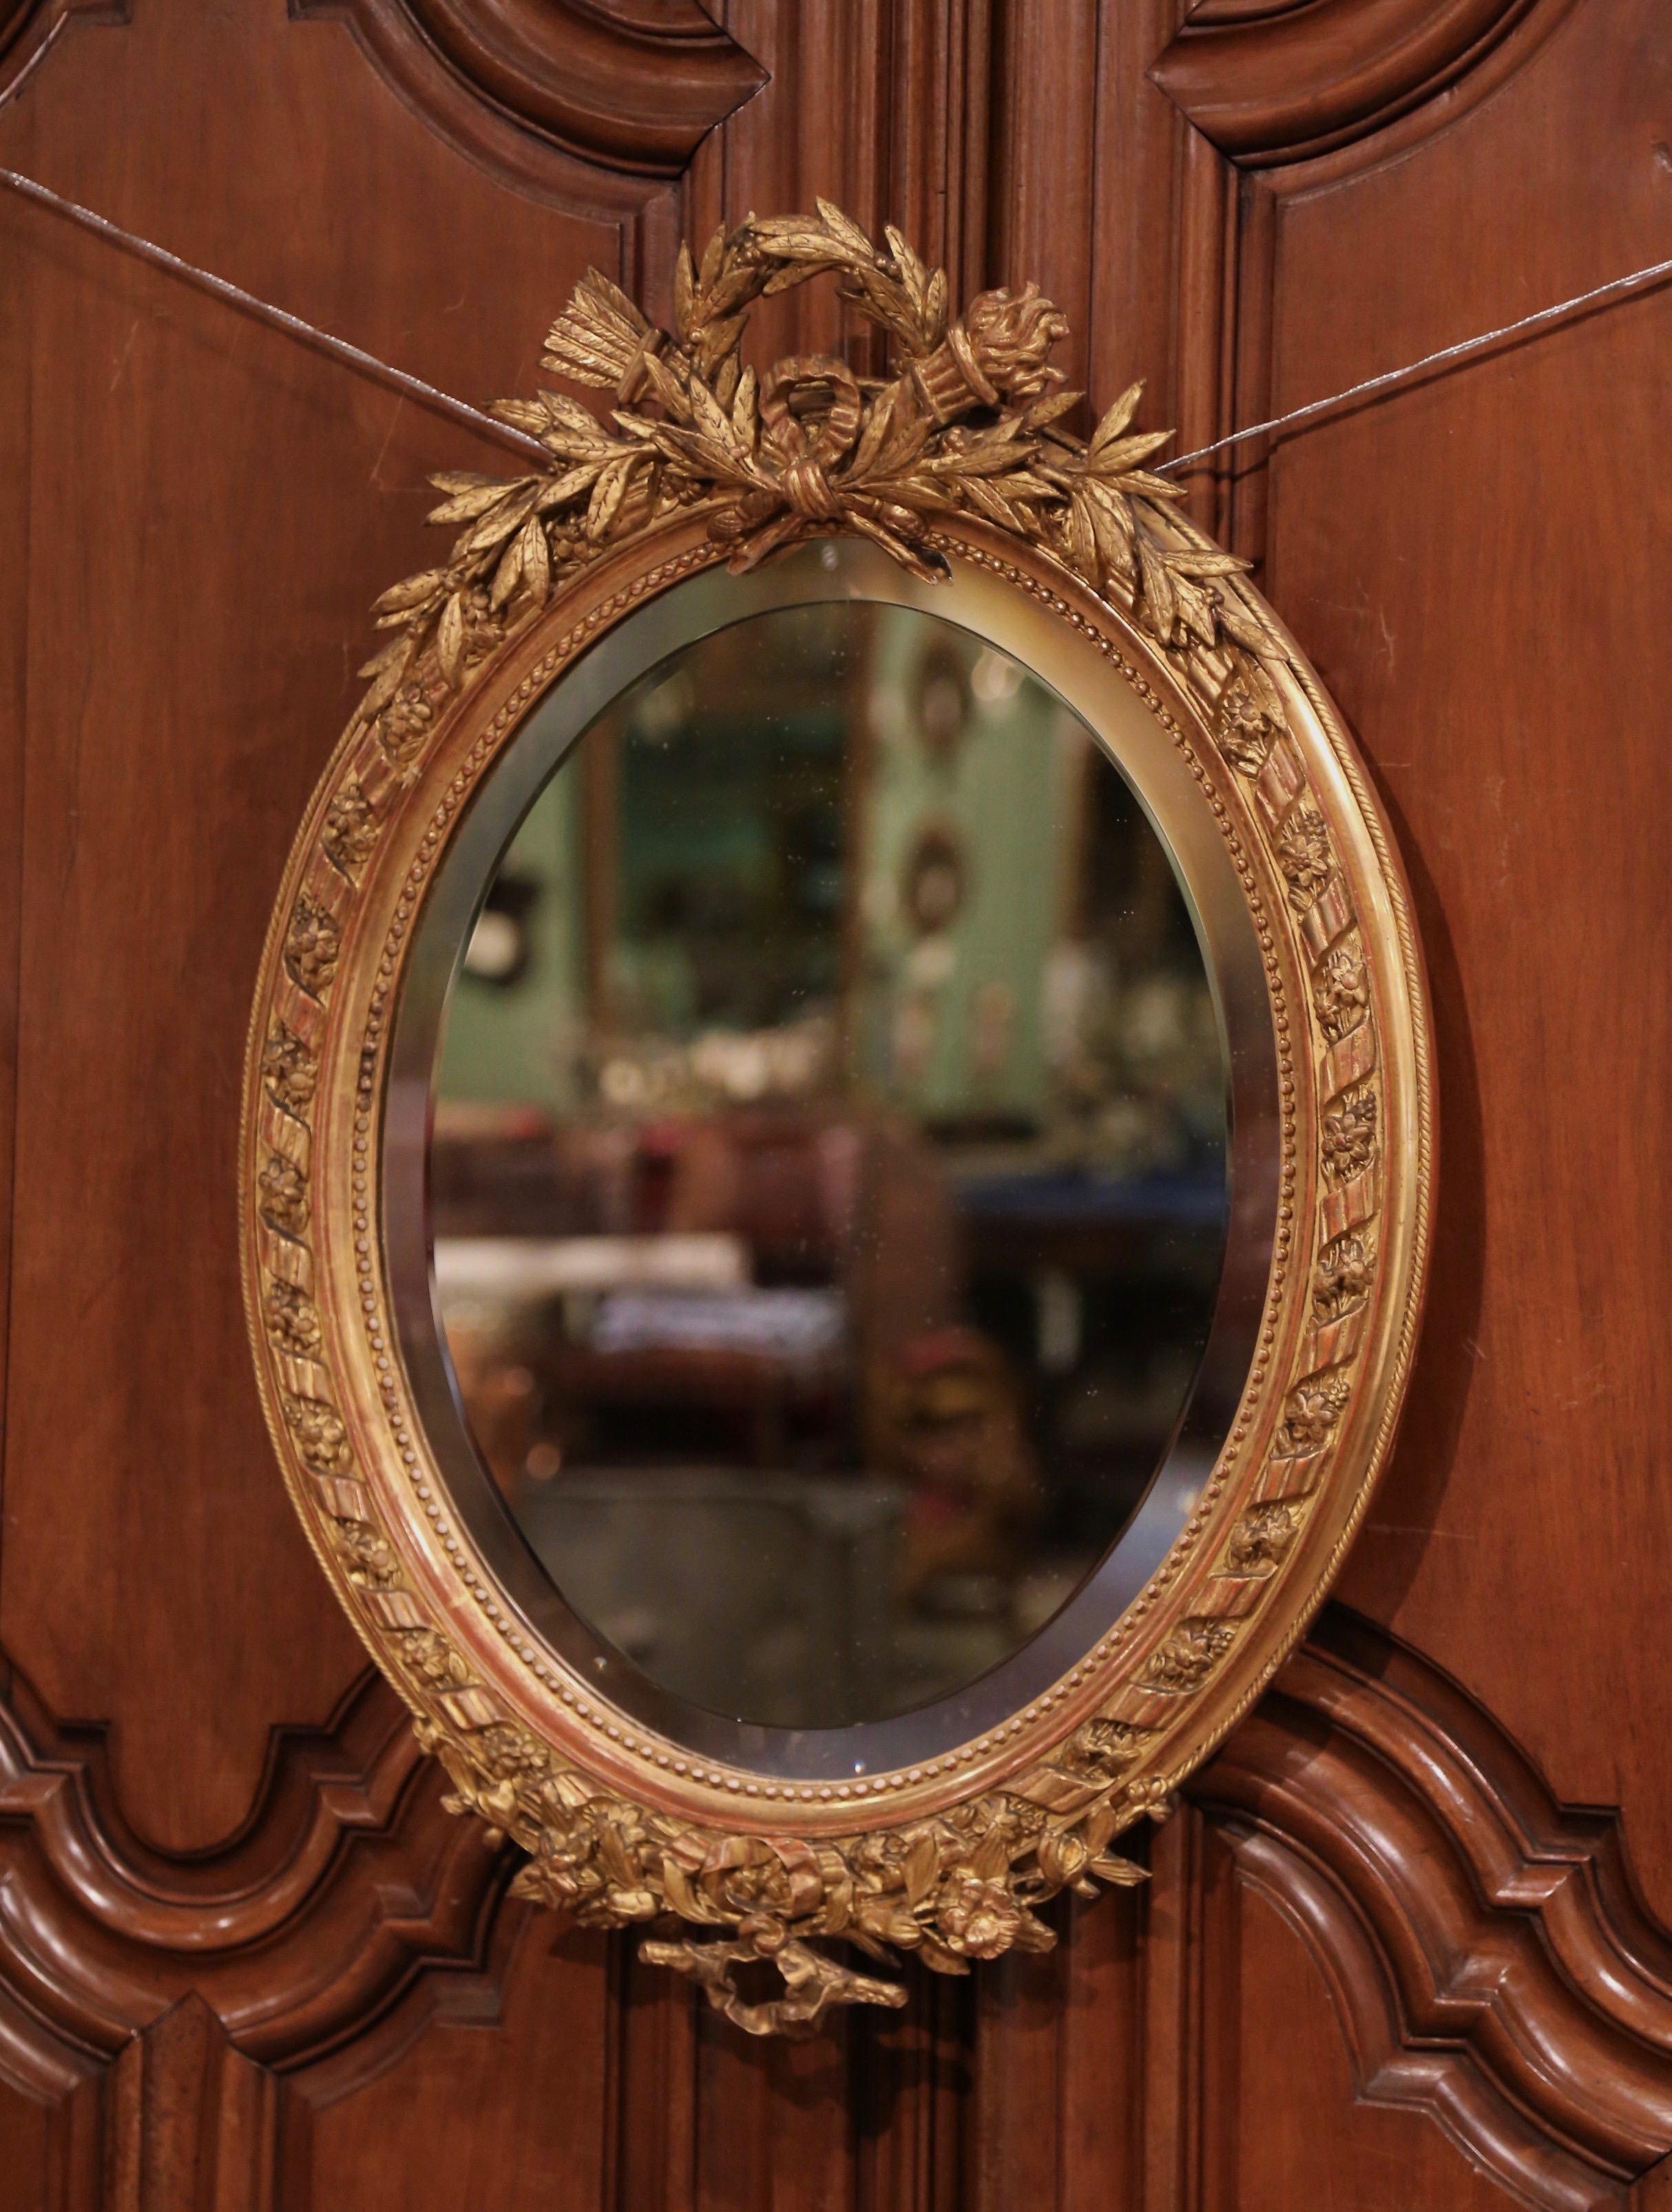 Decorate a powder room or entry with this elegant antique wall mirror. Crafted in France circa 1860 and oval in shape, the carved frame is decorated with floral motifs including carved torch and laurel motifs at the pediment, and embellished with a